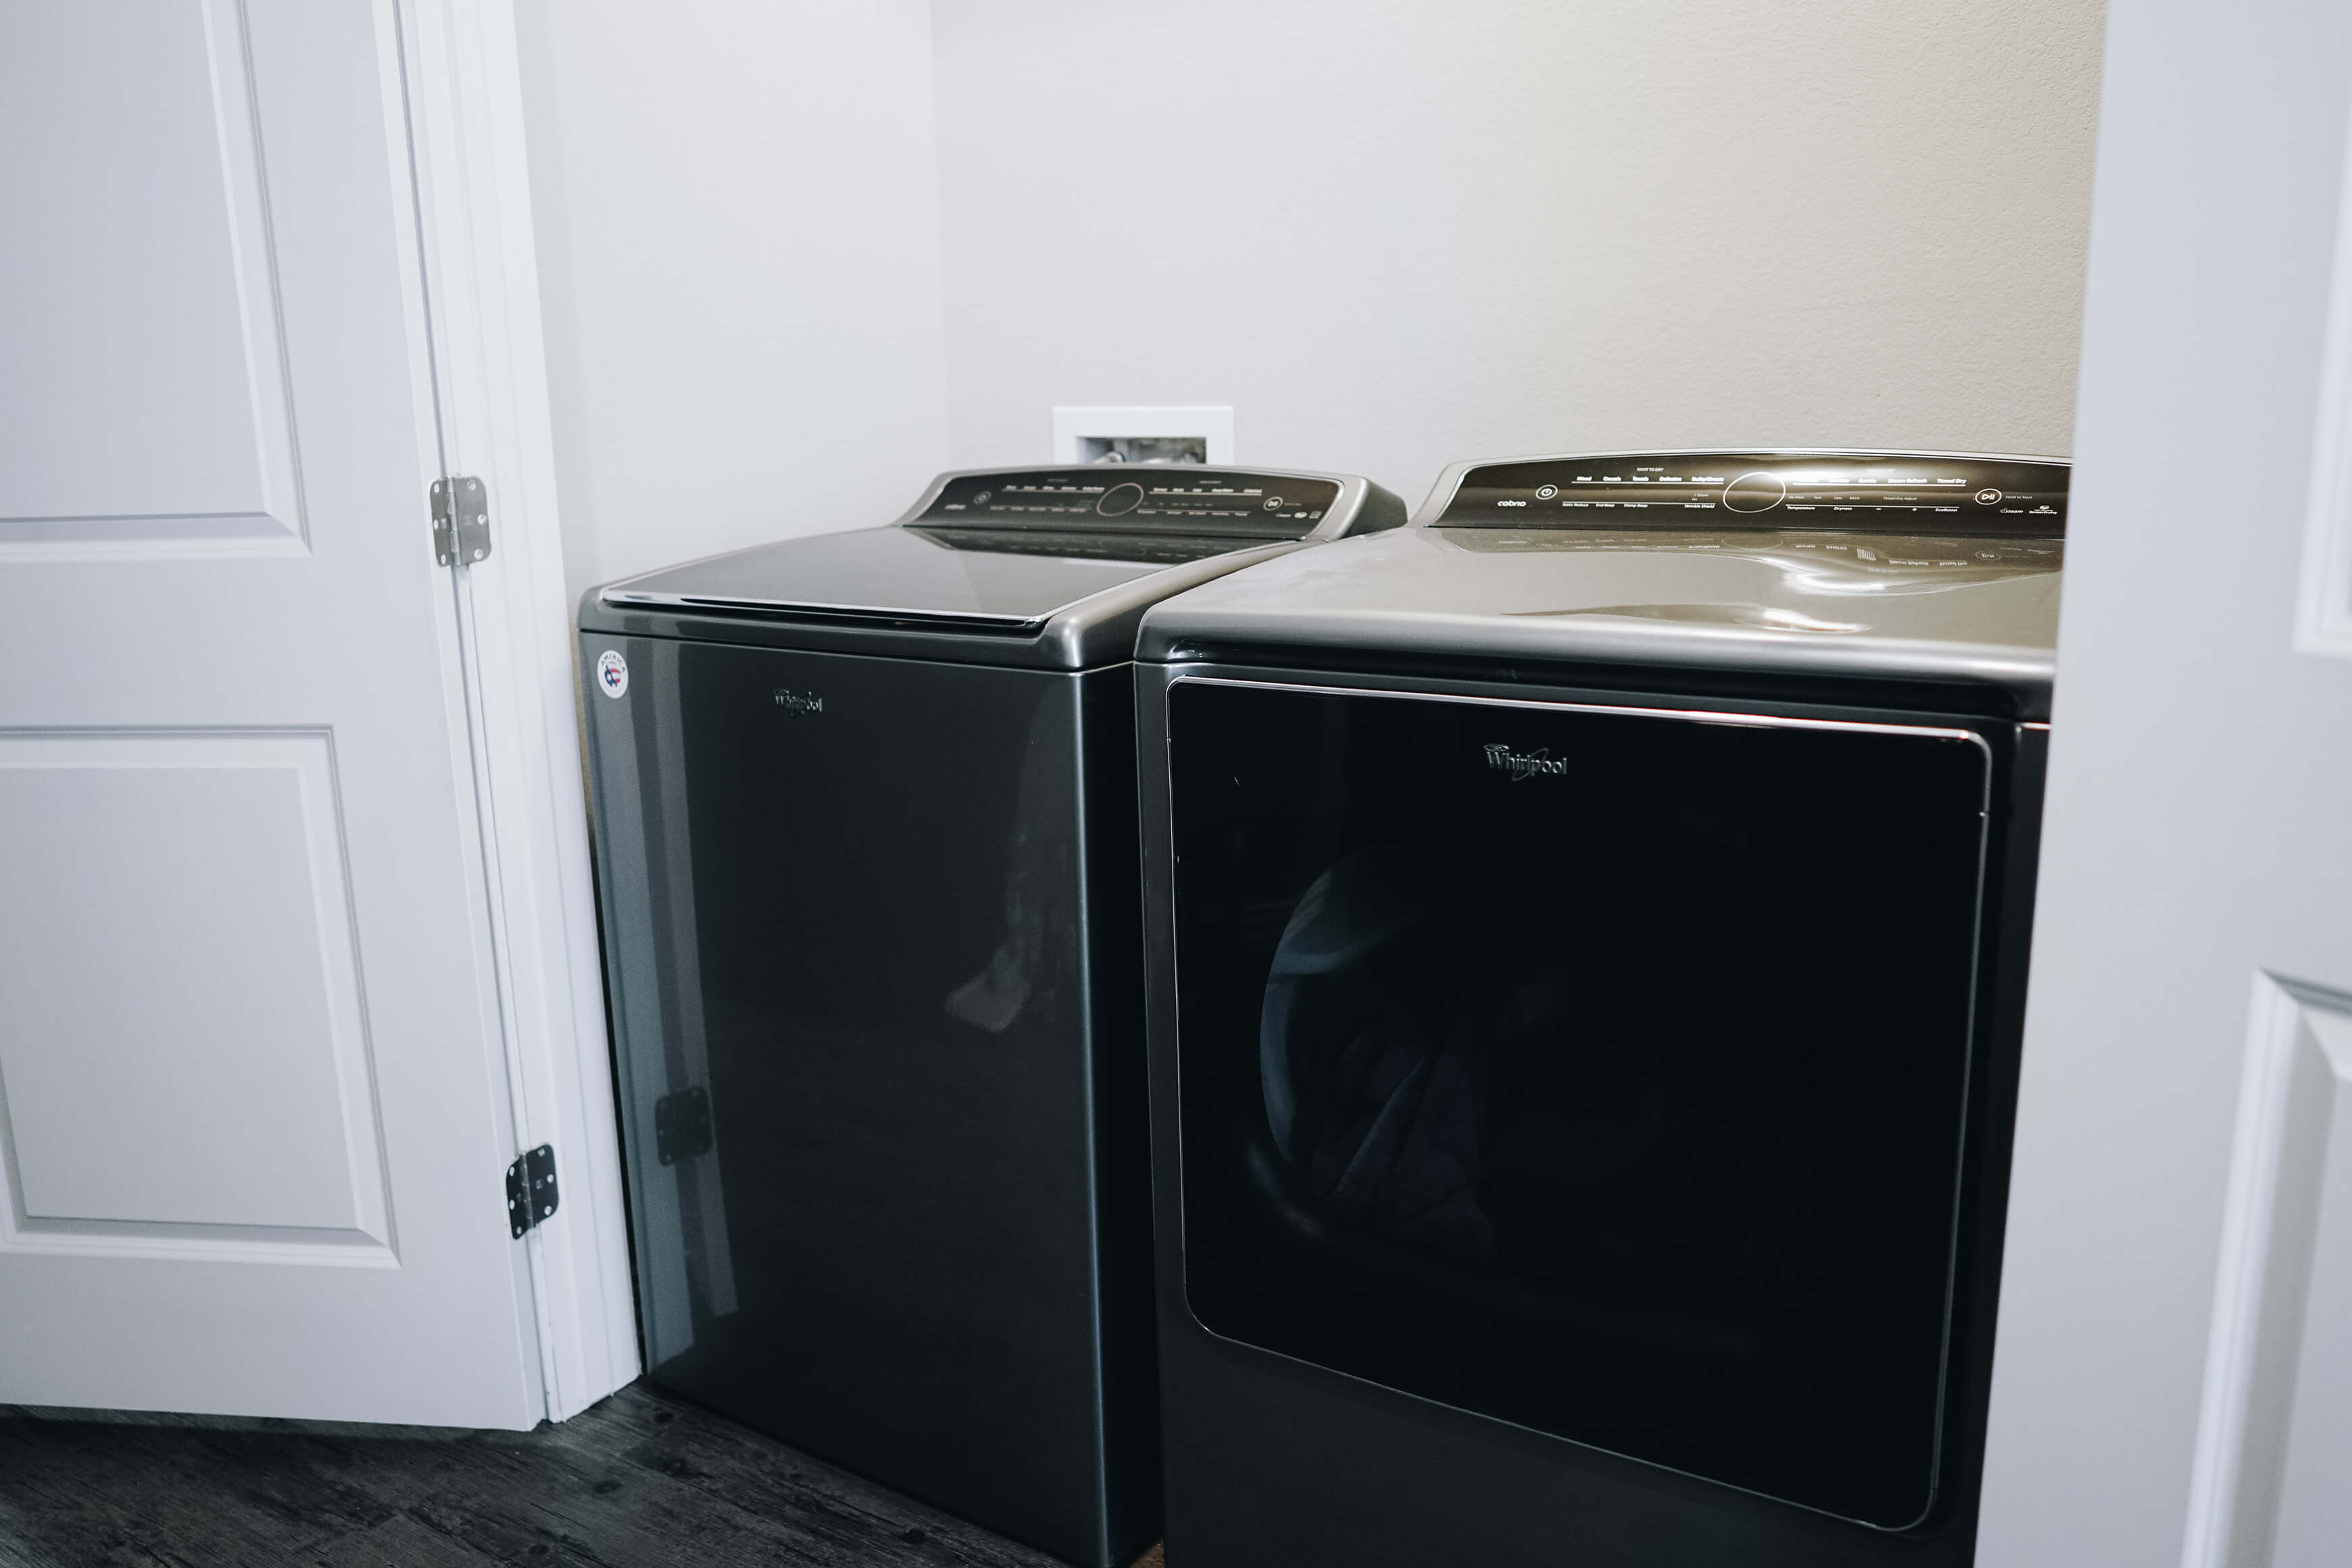 a picture of the fullsize washer and dryer unit in the durango townhome